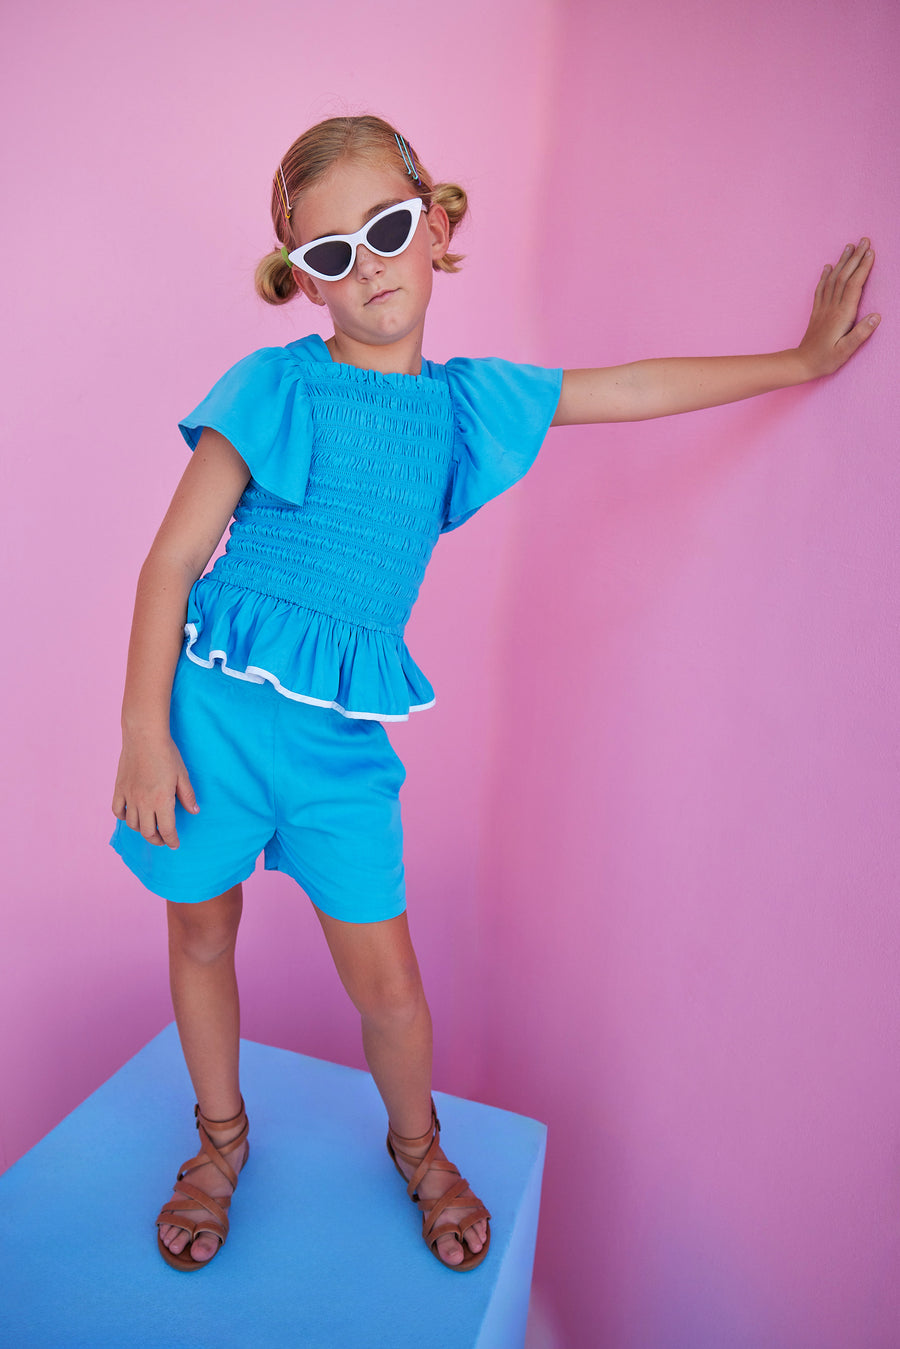 Blue Basic Shorts in our rayon blend material with an elastic waistband and pockets paired with our India Top in Blue.